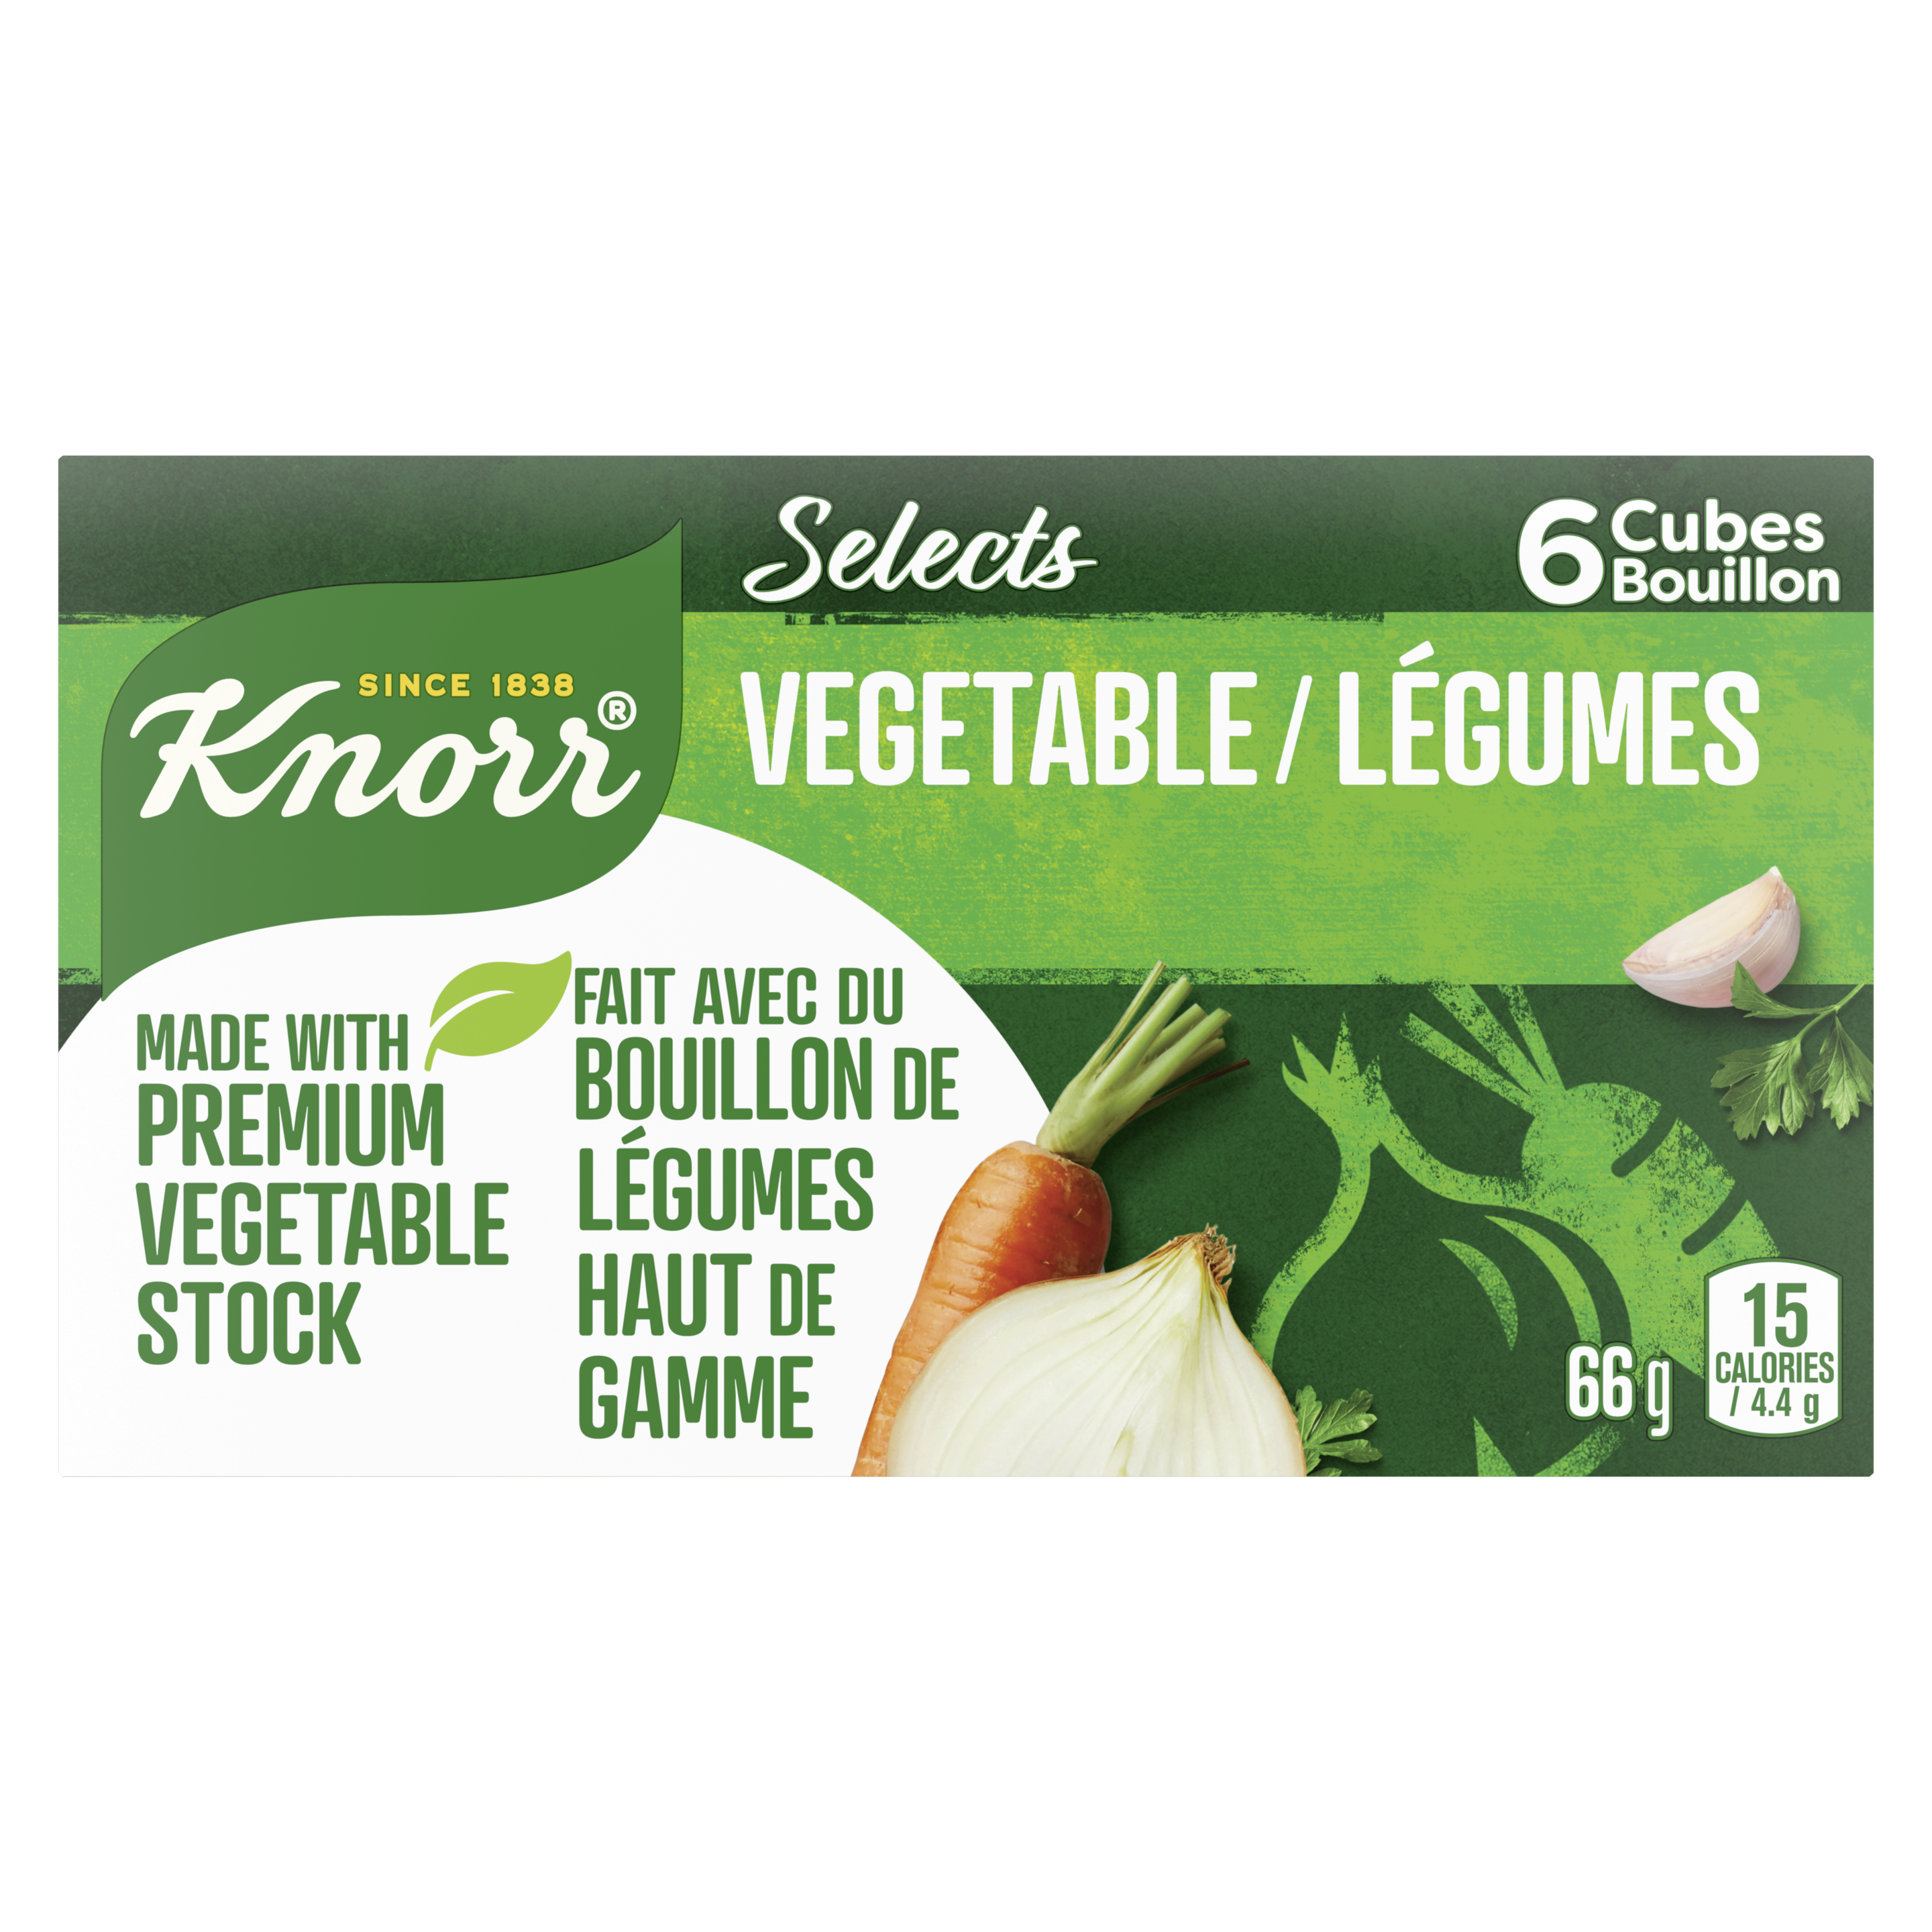 Knorr Selects™ Vegetable Bouillon Cubes